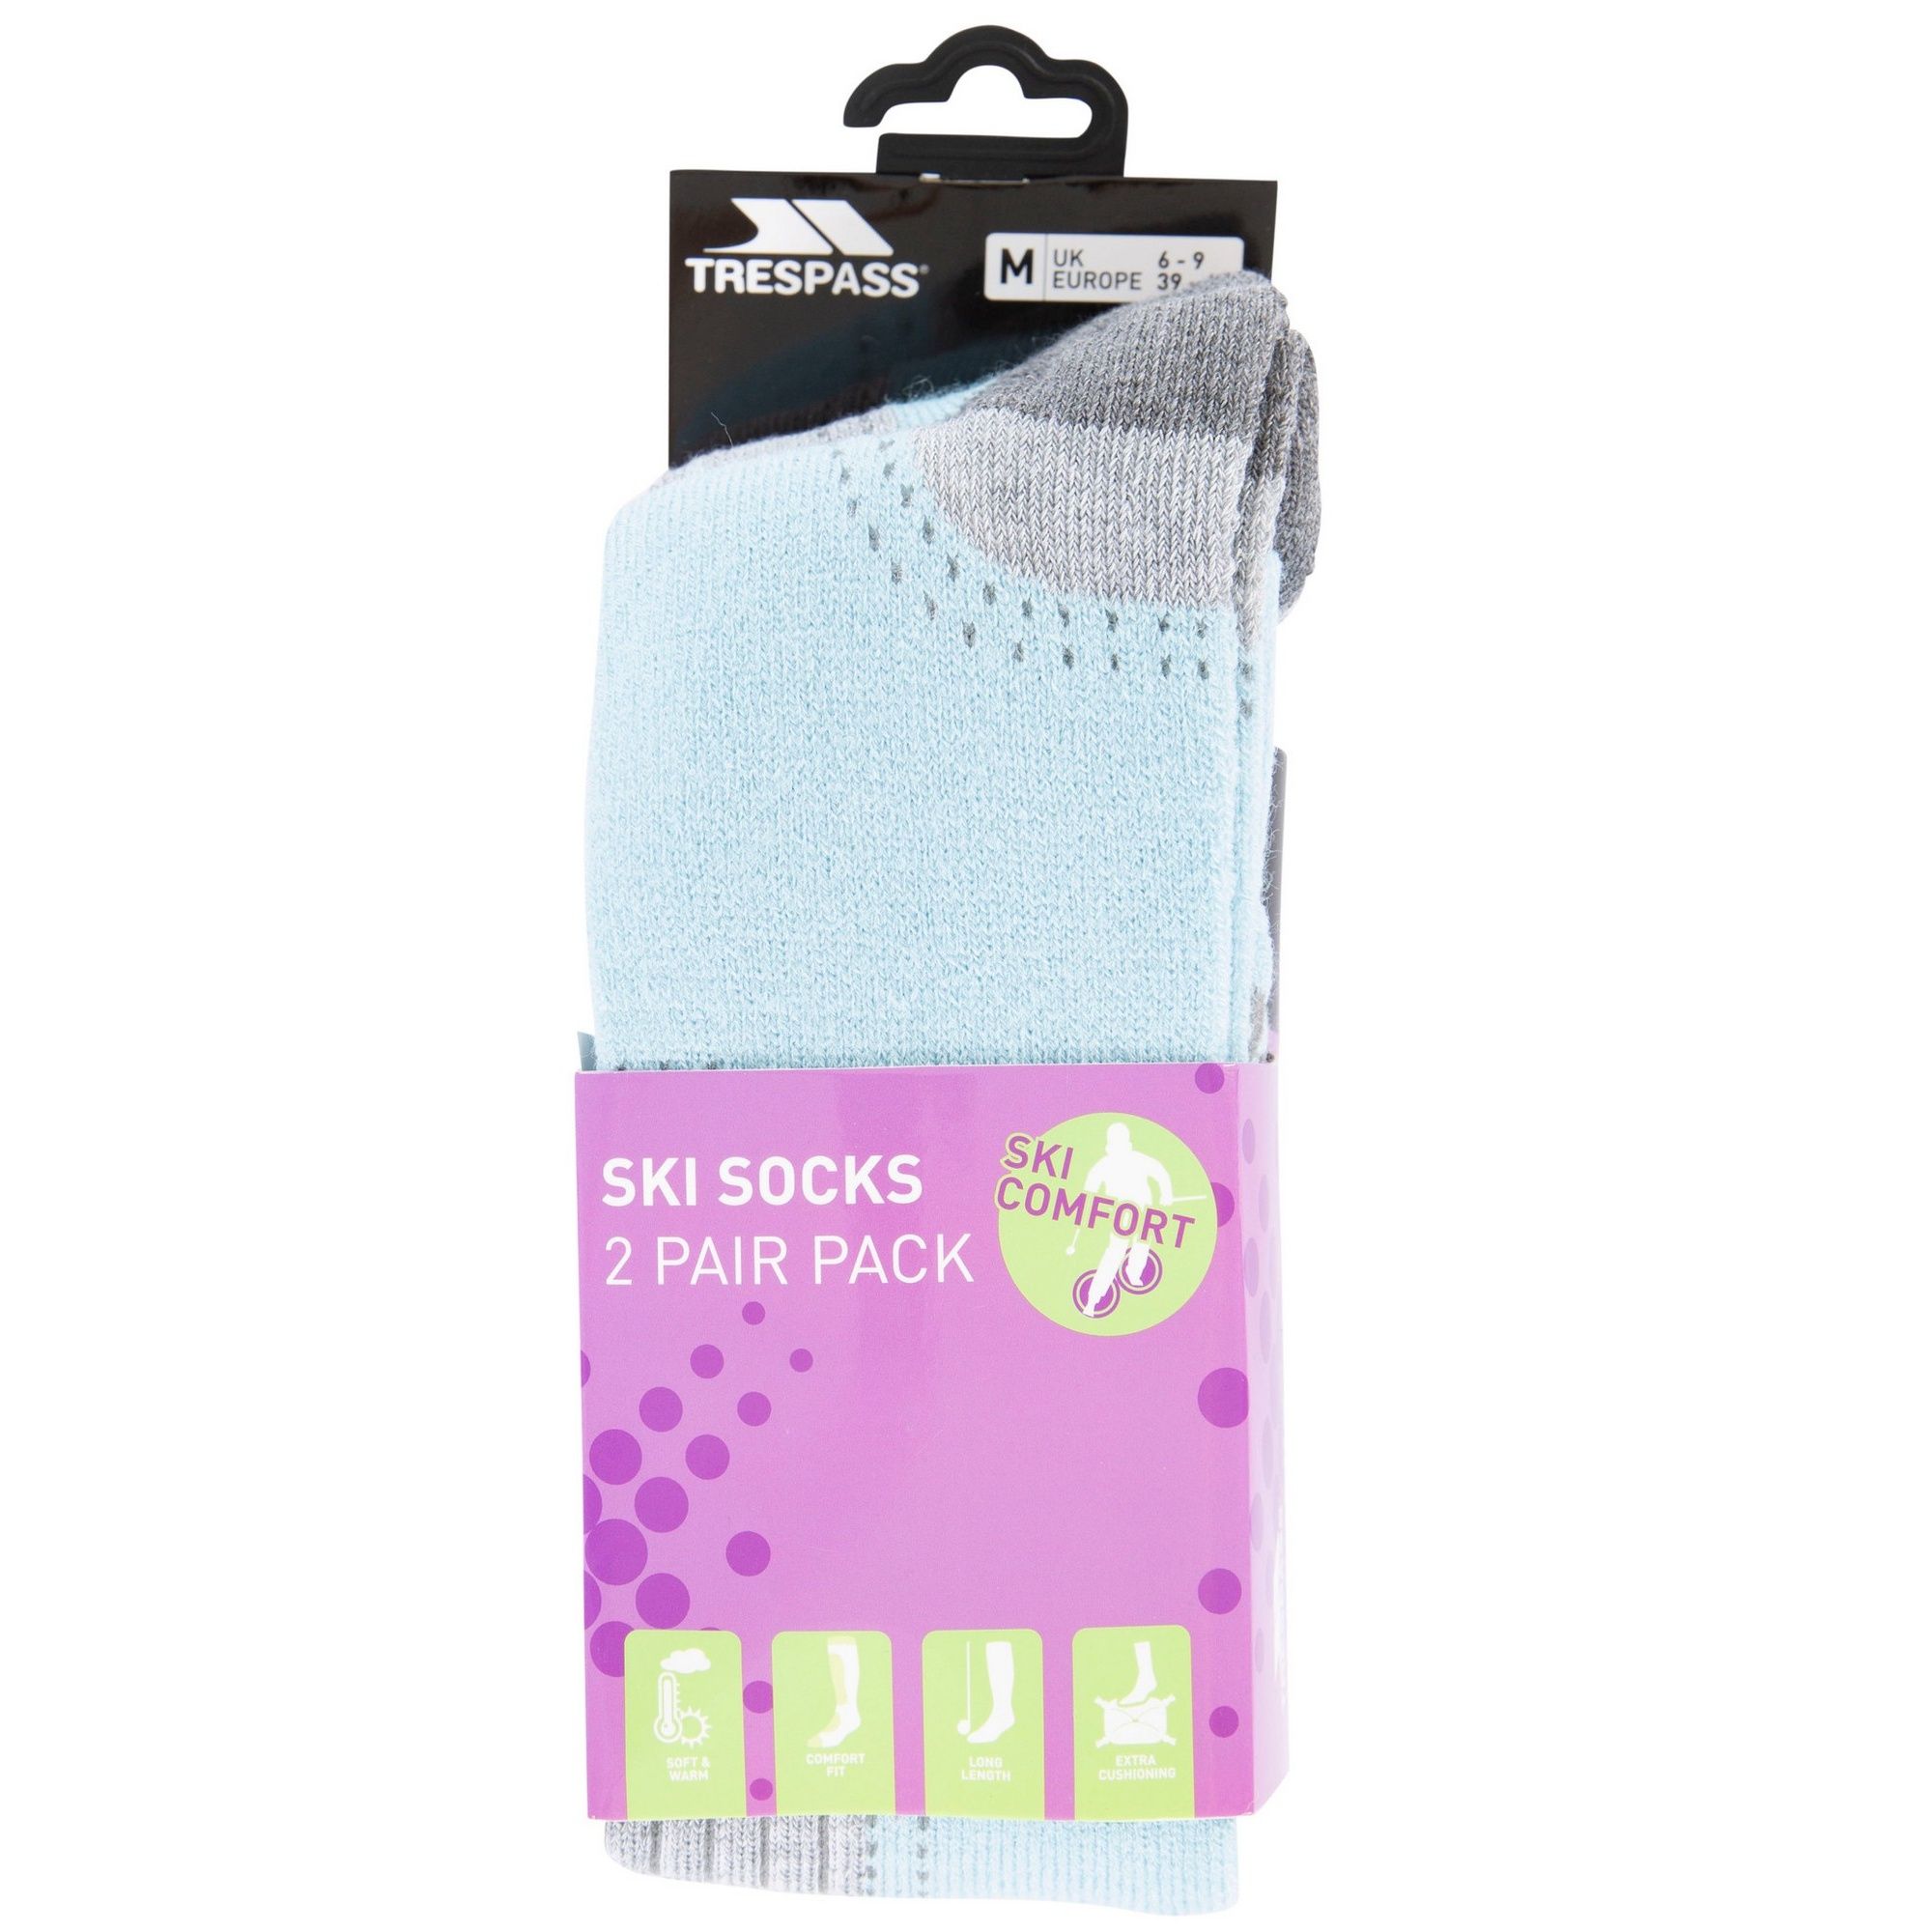 Womens ski socks with snug fit. 2 pairs per pack. Fit halfway up the calf. Ideal for skiing. 85% Acrylic, 13% Polyamide, 2% Elastane.